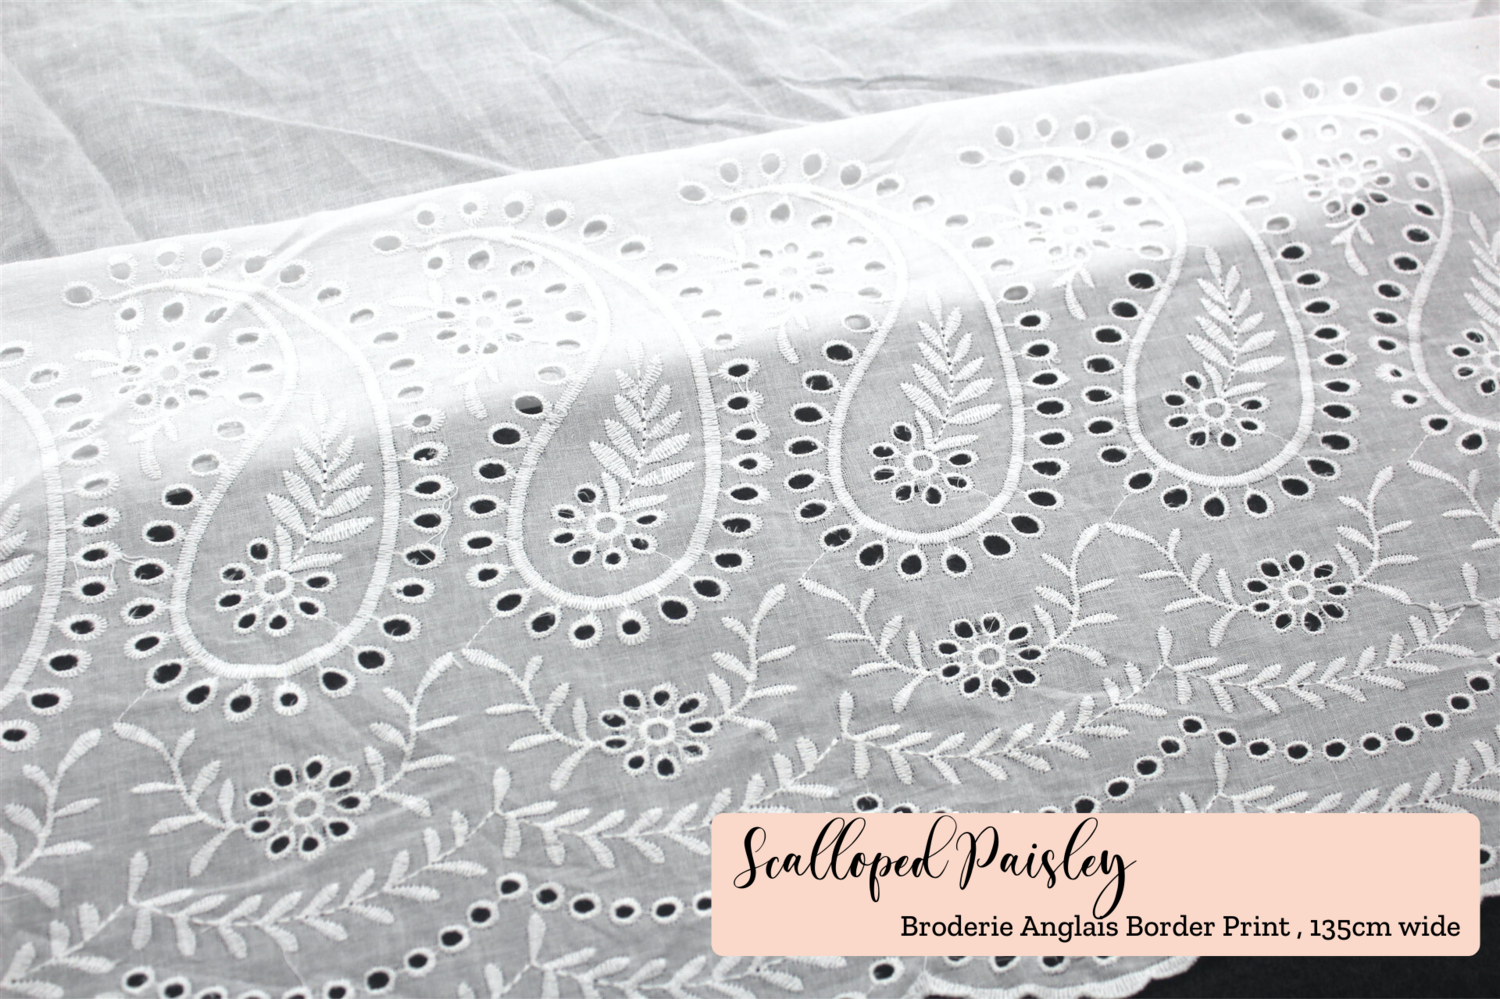 Scalloped Paisley | Broderie Anglais Border Print | 130cm Wide - 0.8m Piece